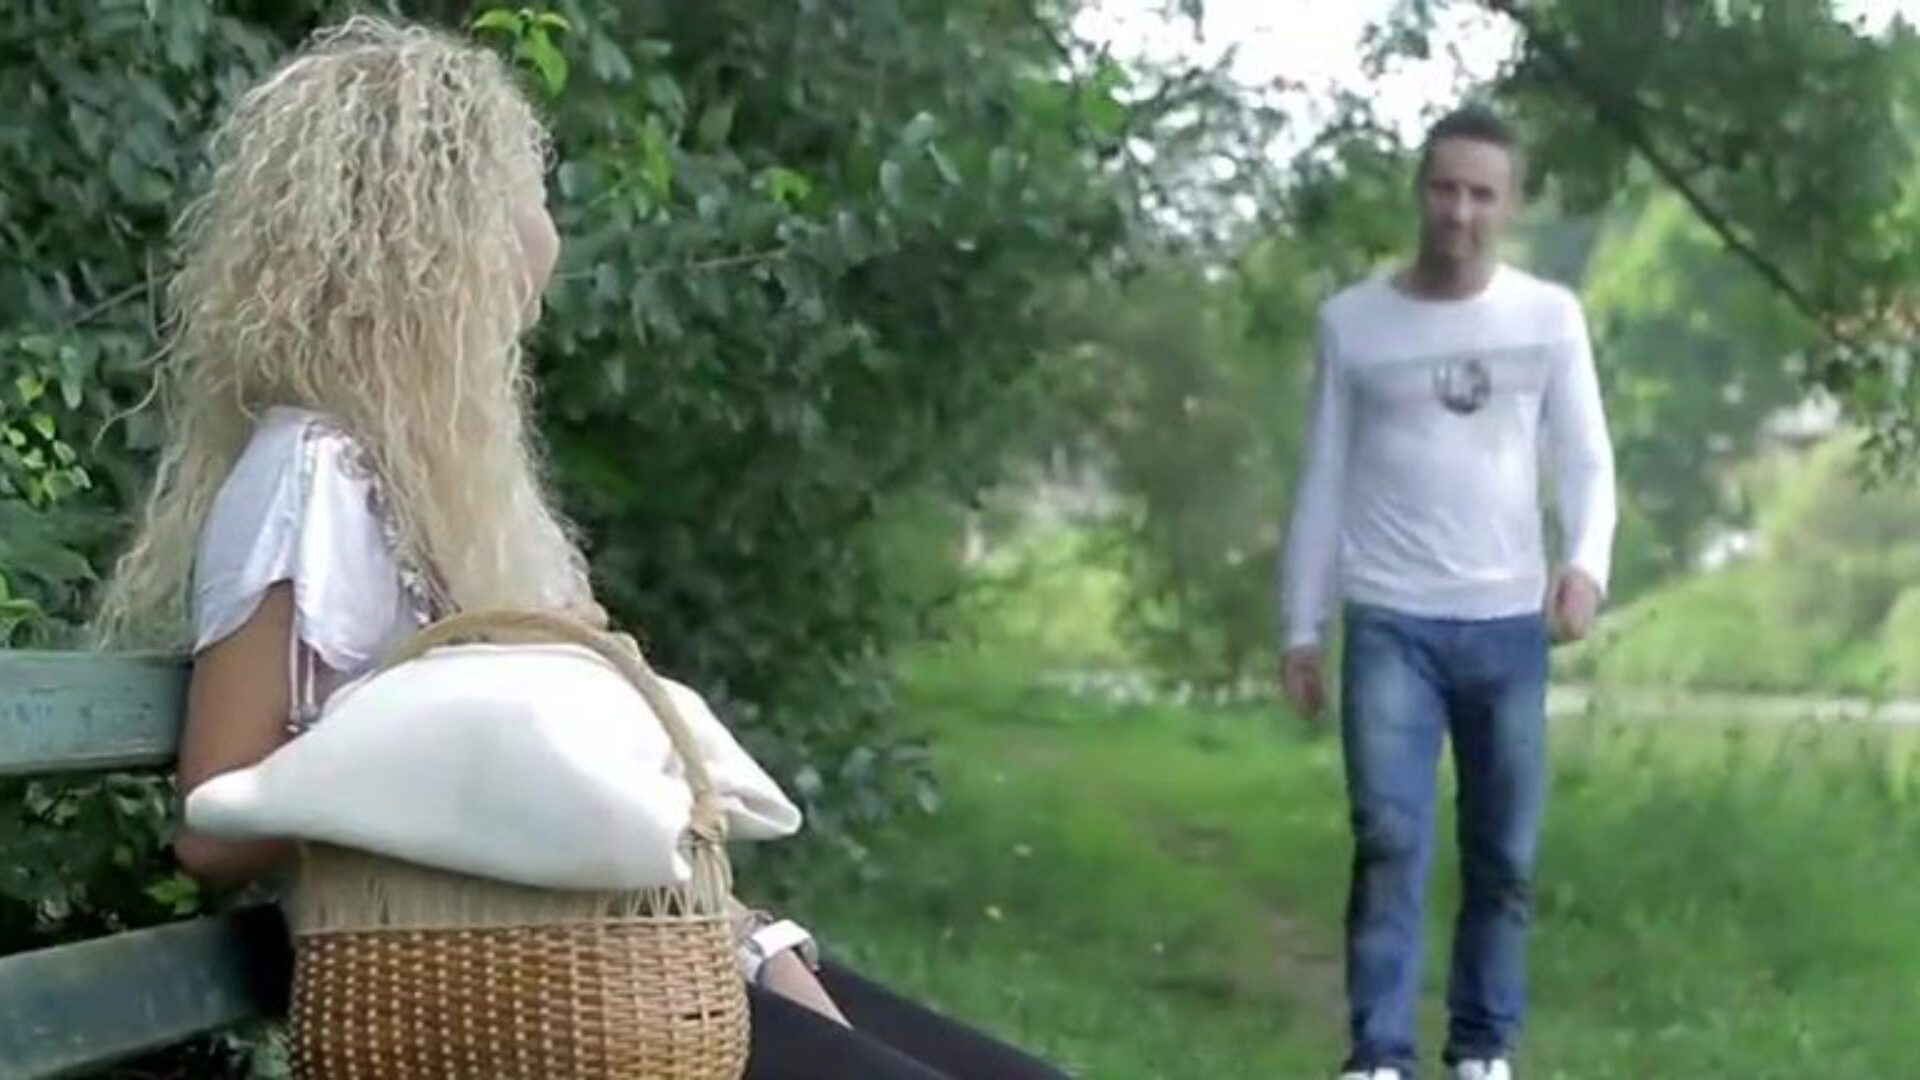 Romantic picnic with a frizzy haired mom finishes with hardcore fucking A European MILF meets up with her boyfriend in the park. She's cheerful to watch him and he's happy to see her. They find a secluded spot in the bushes before making out energetically You know where this is going! The man starts taking off her raiment to reveal that she's not wearing her panties (or brassiere for that matter). Now we acquire to enjoy some enjoyable CMNF action as the man slurps that older pussy The stripped mamma decides to return the favor by pushing his sinewy penis in her crazy face hole After this warmed exchange of oral sex pleasantries, the blond-haired mom grips him by the penis and guides it in her fur pie The beauty with tan lines bounces on that bone impatiently displaying off her perfectly-shaped stiff gazoo along the way got to love the close-ups After lovin’ some cowgirl action the frizzy-haired older takes it on all fours stinging the blanket along the way. Finally, after going through some missionary, the boy pulls out at the last possible moment to spunk all over her ideal abdomen